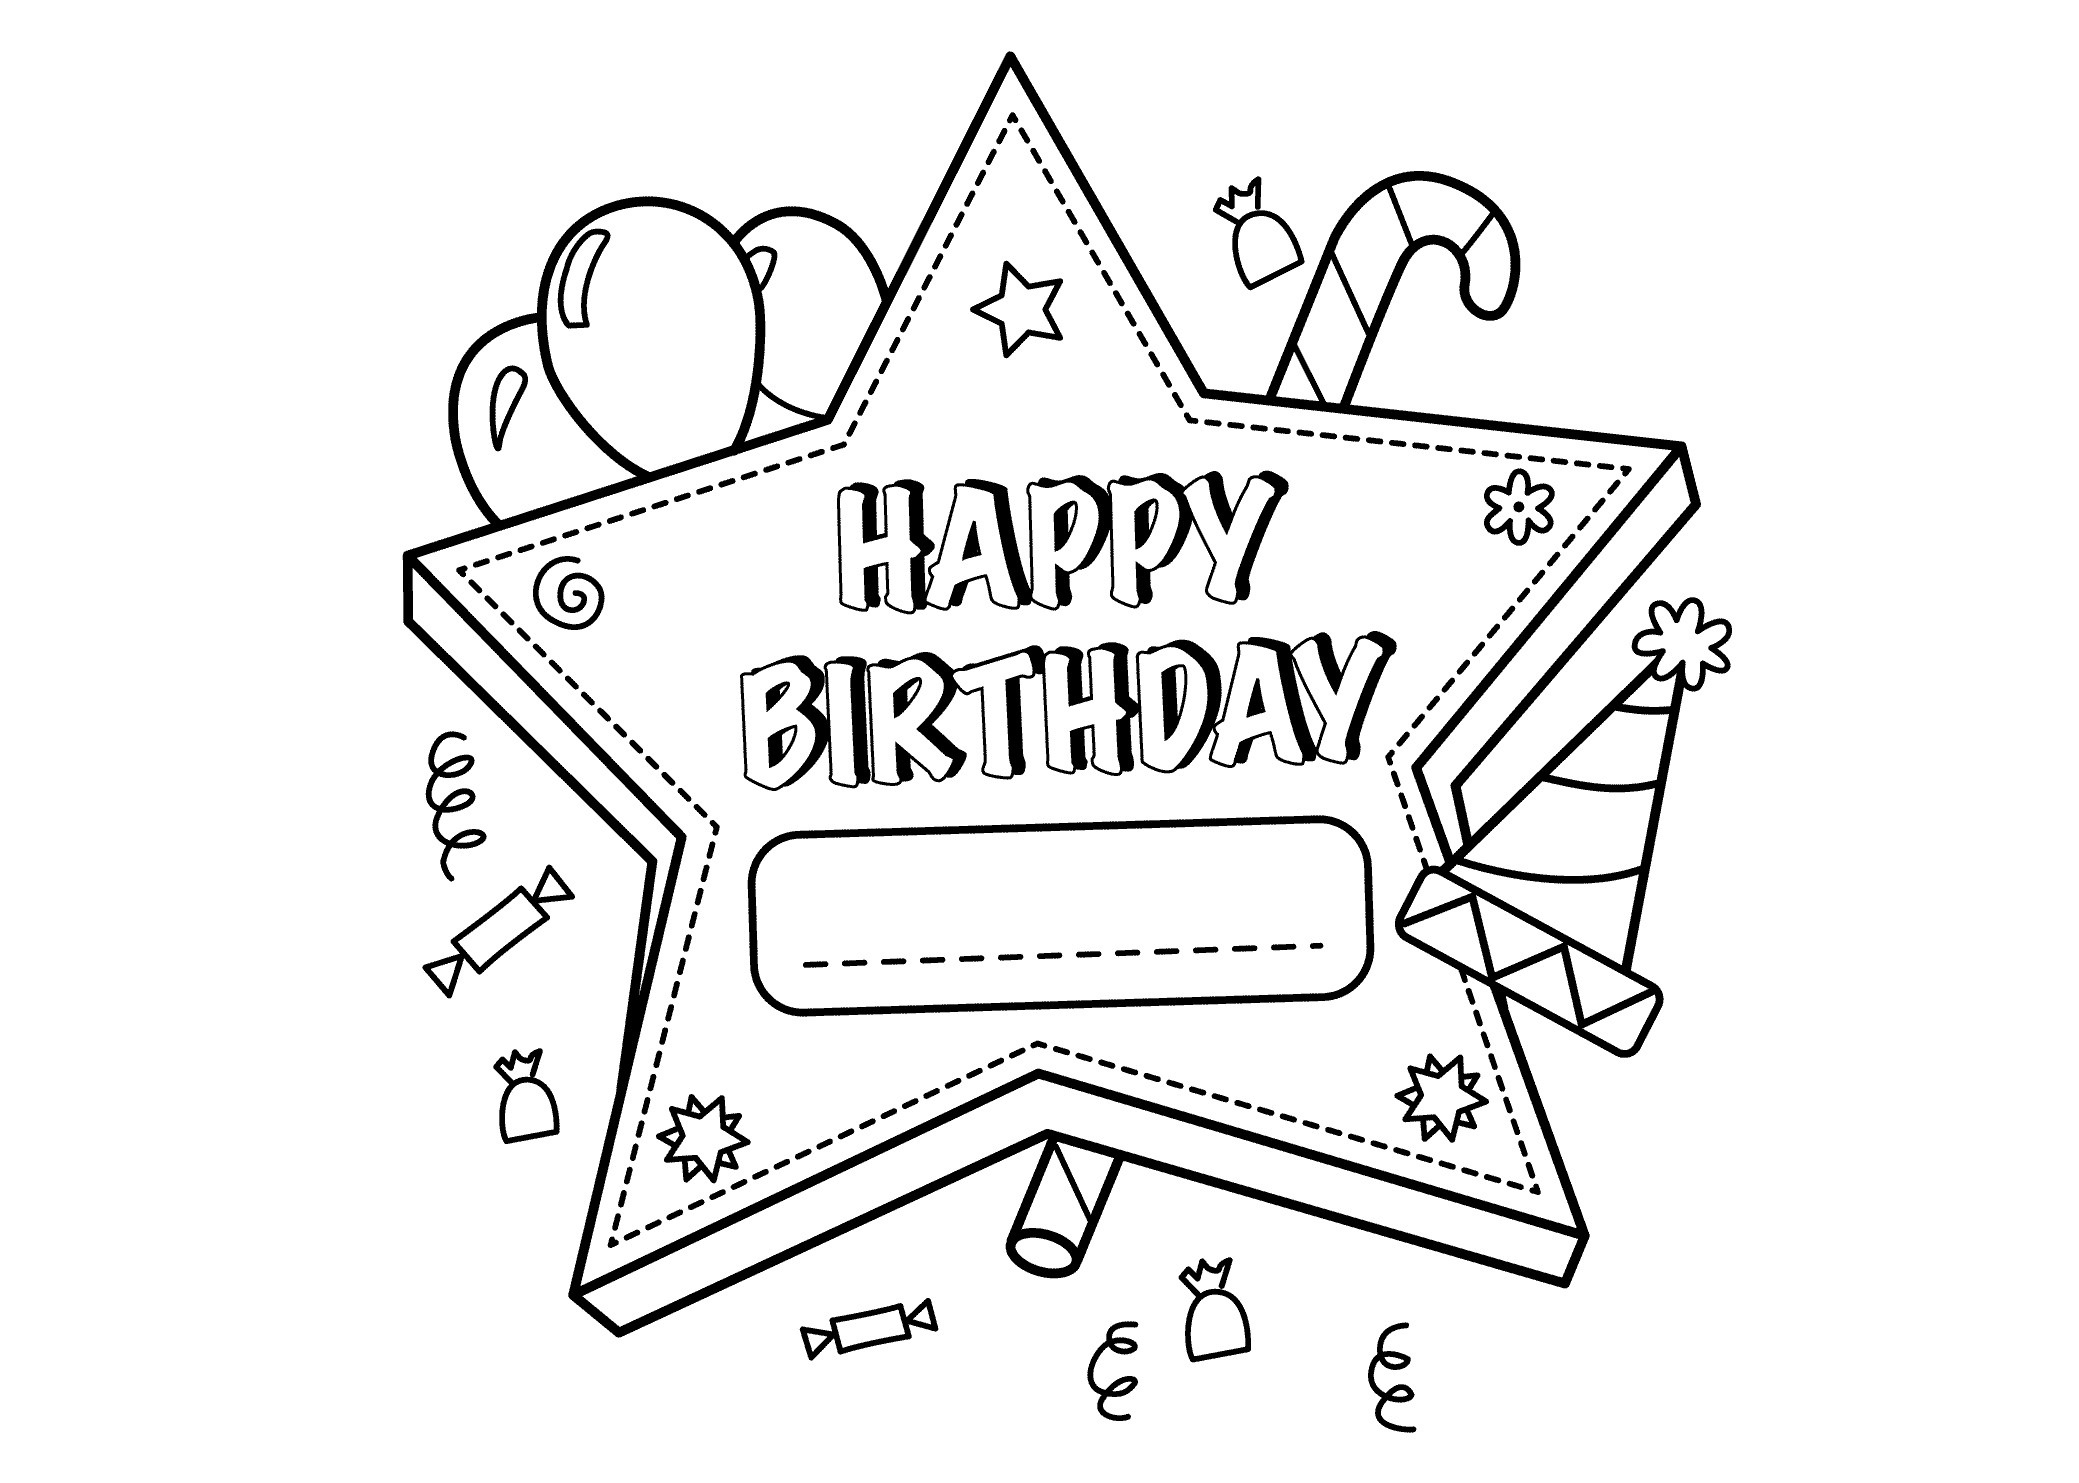 Personalized Birthday Coloring Pages at Free